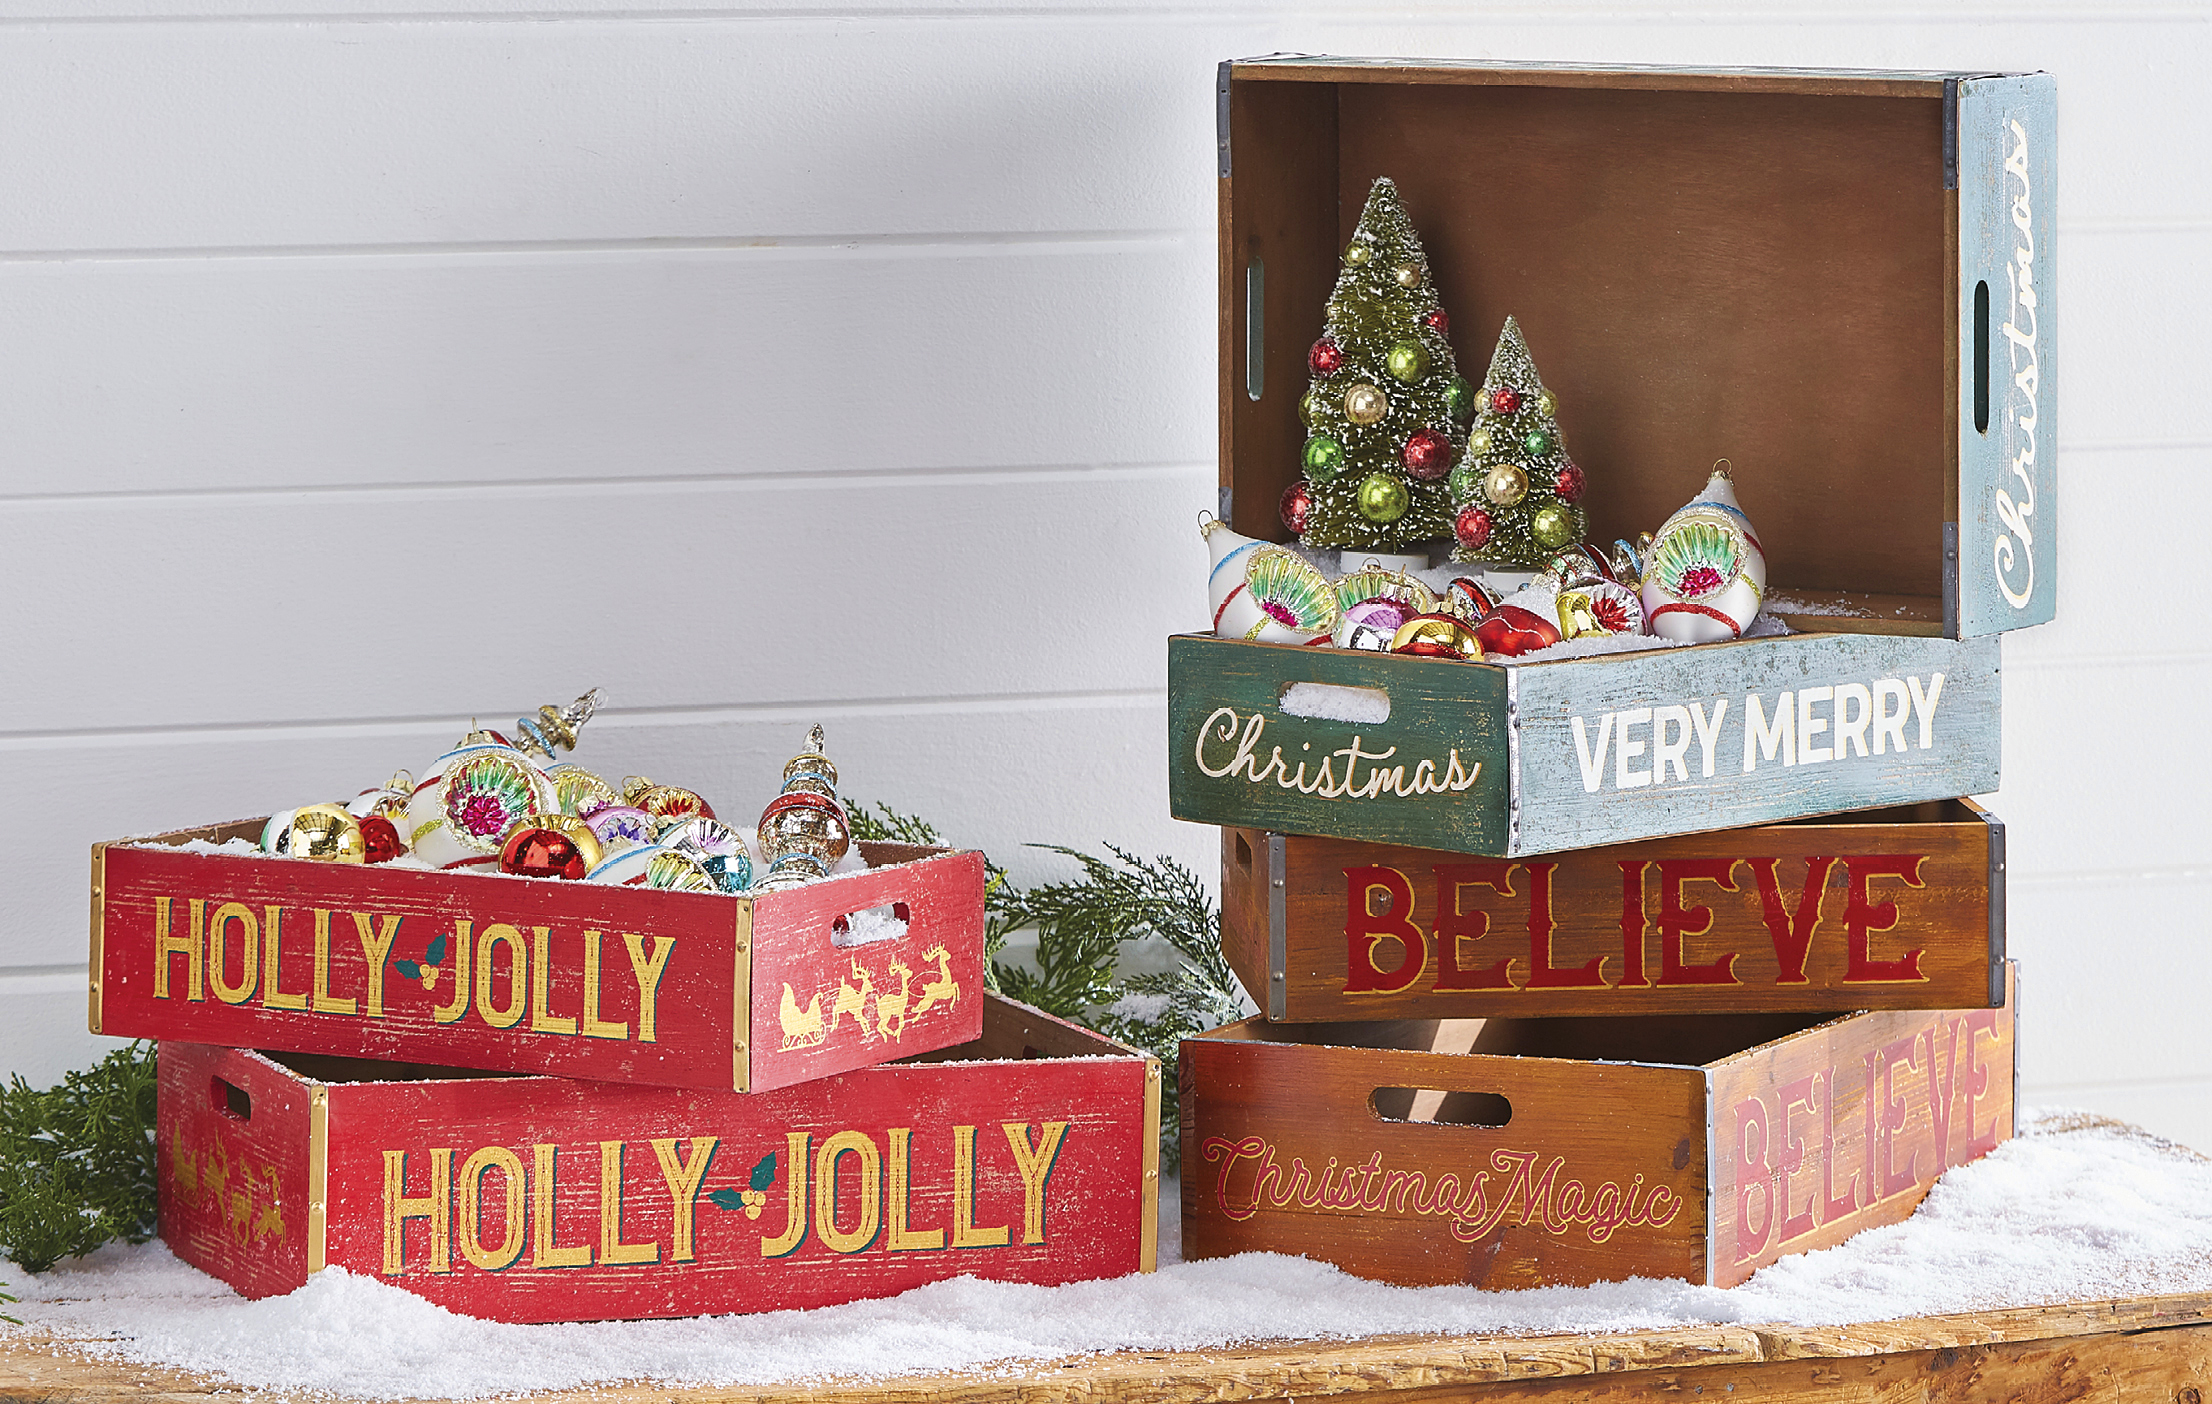 Vintage Christmas Decorations 2022 - The Jolly Christmas Shop